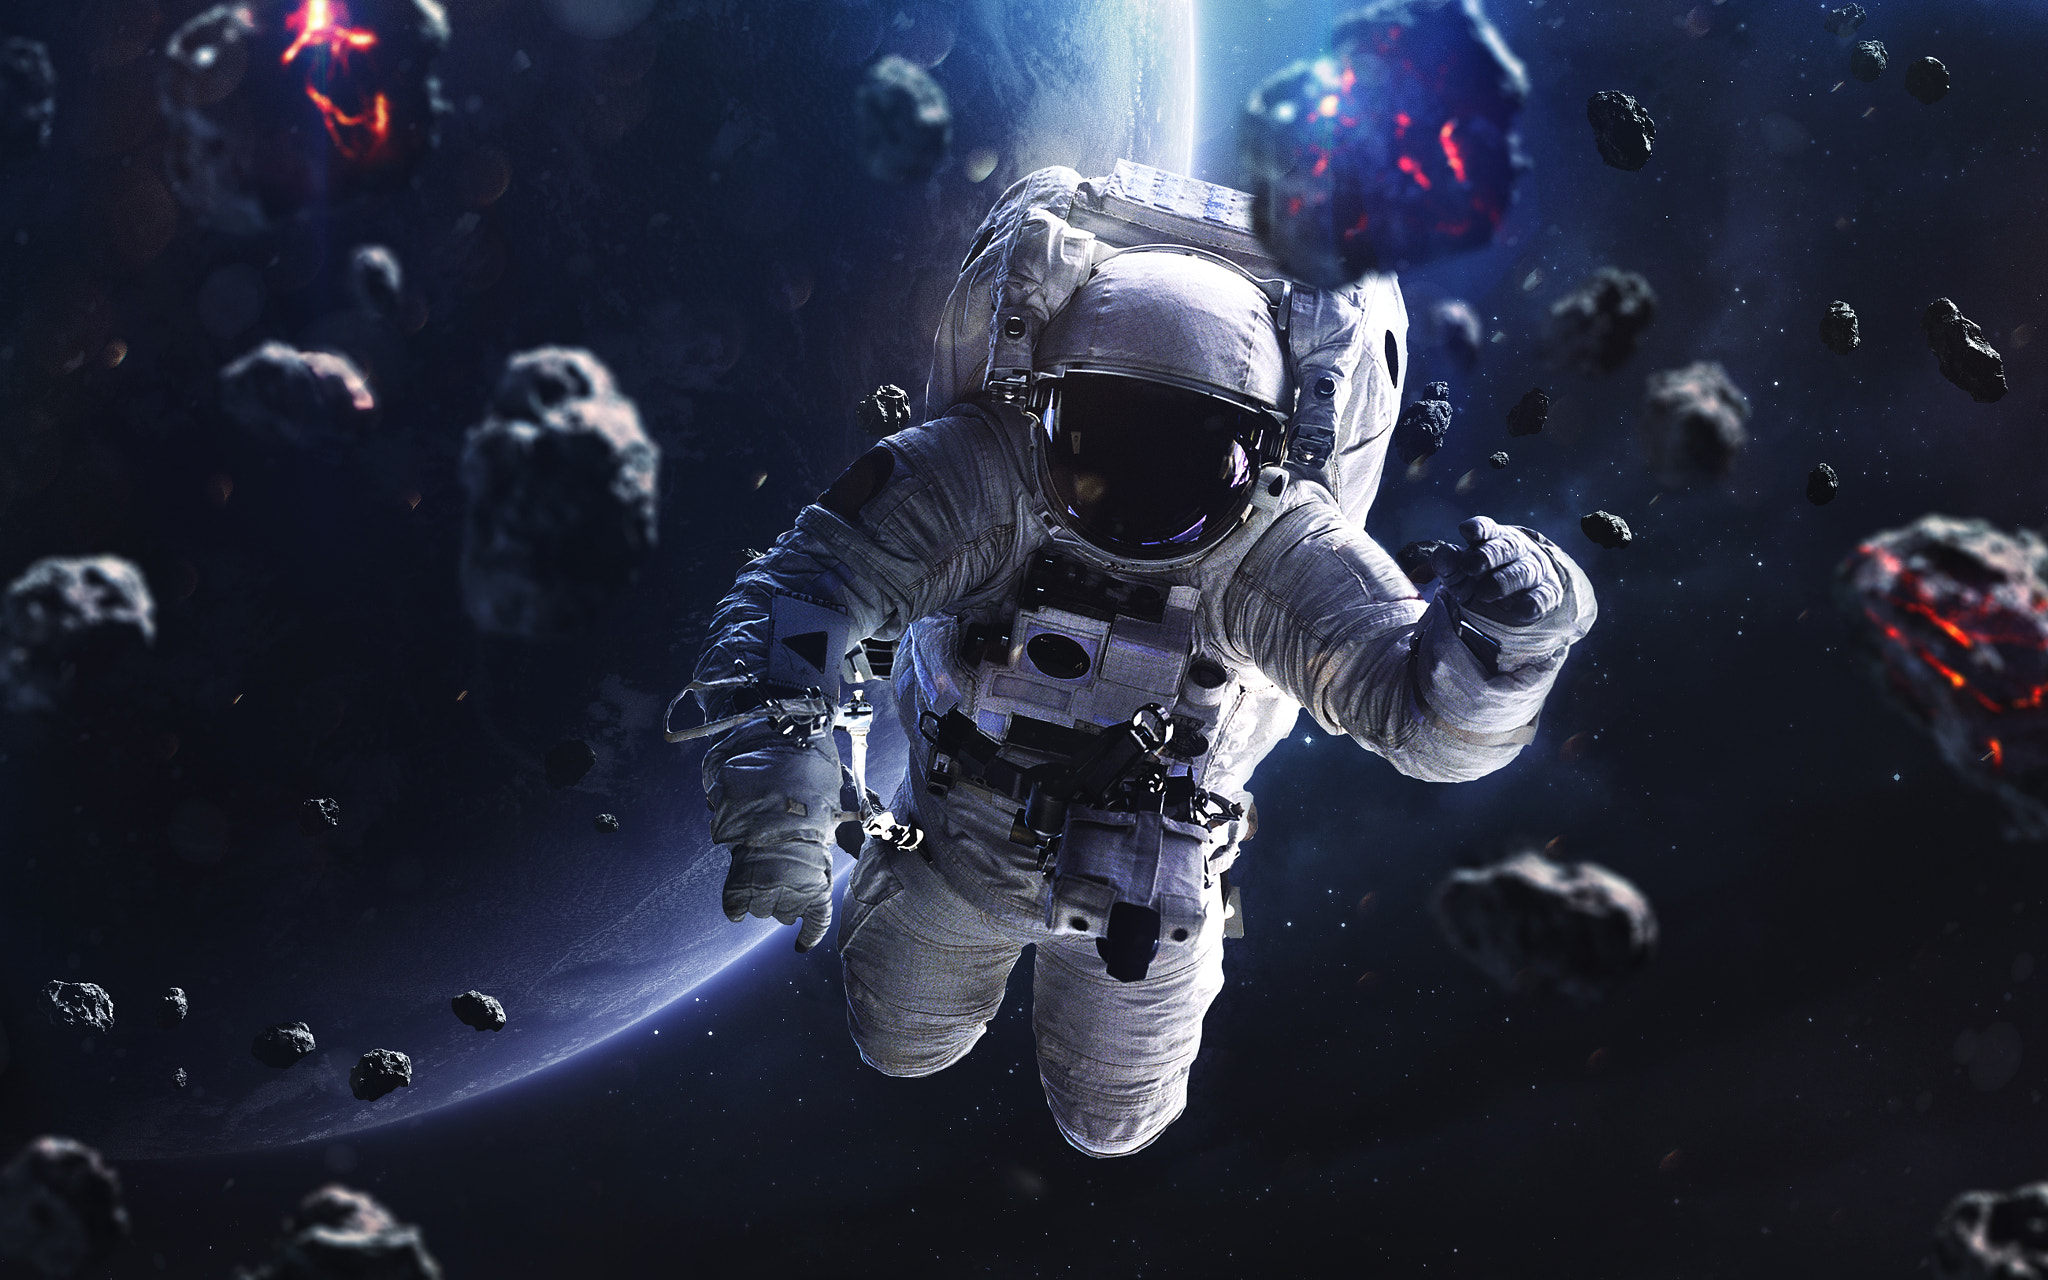 Meteorites And Astronaut. Deep Space Image, Science Fiction Fant Wallpaper